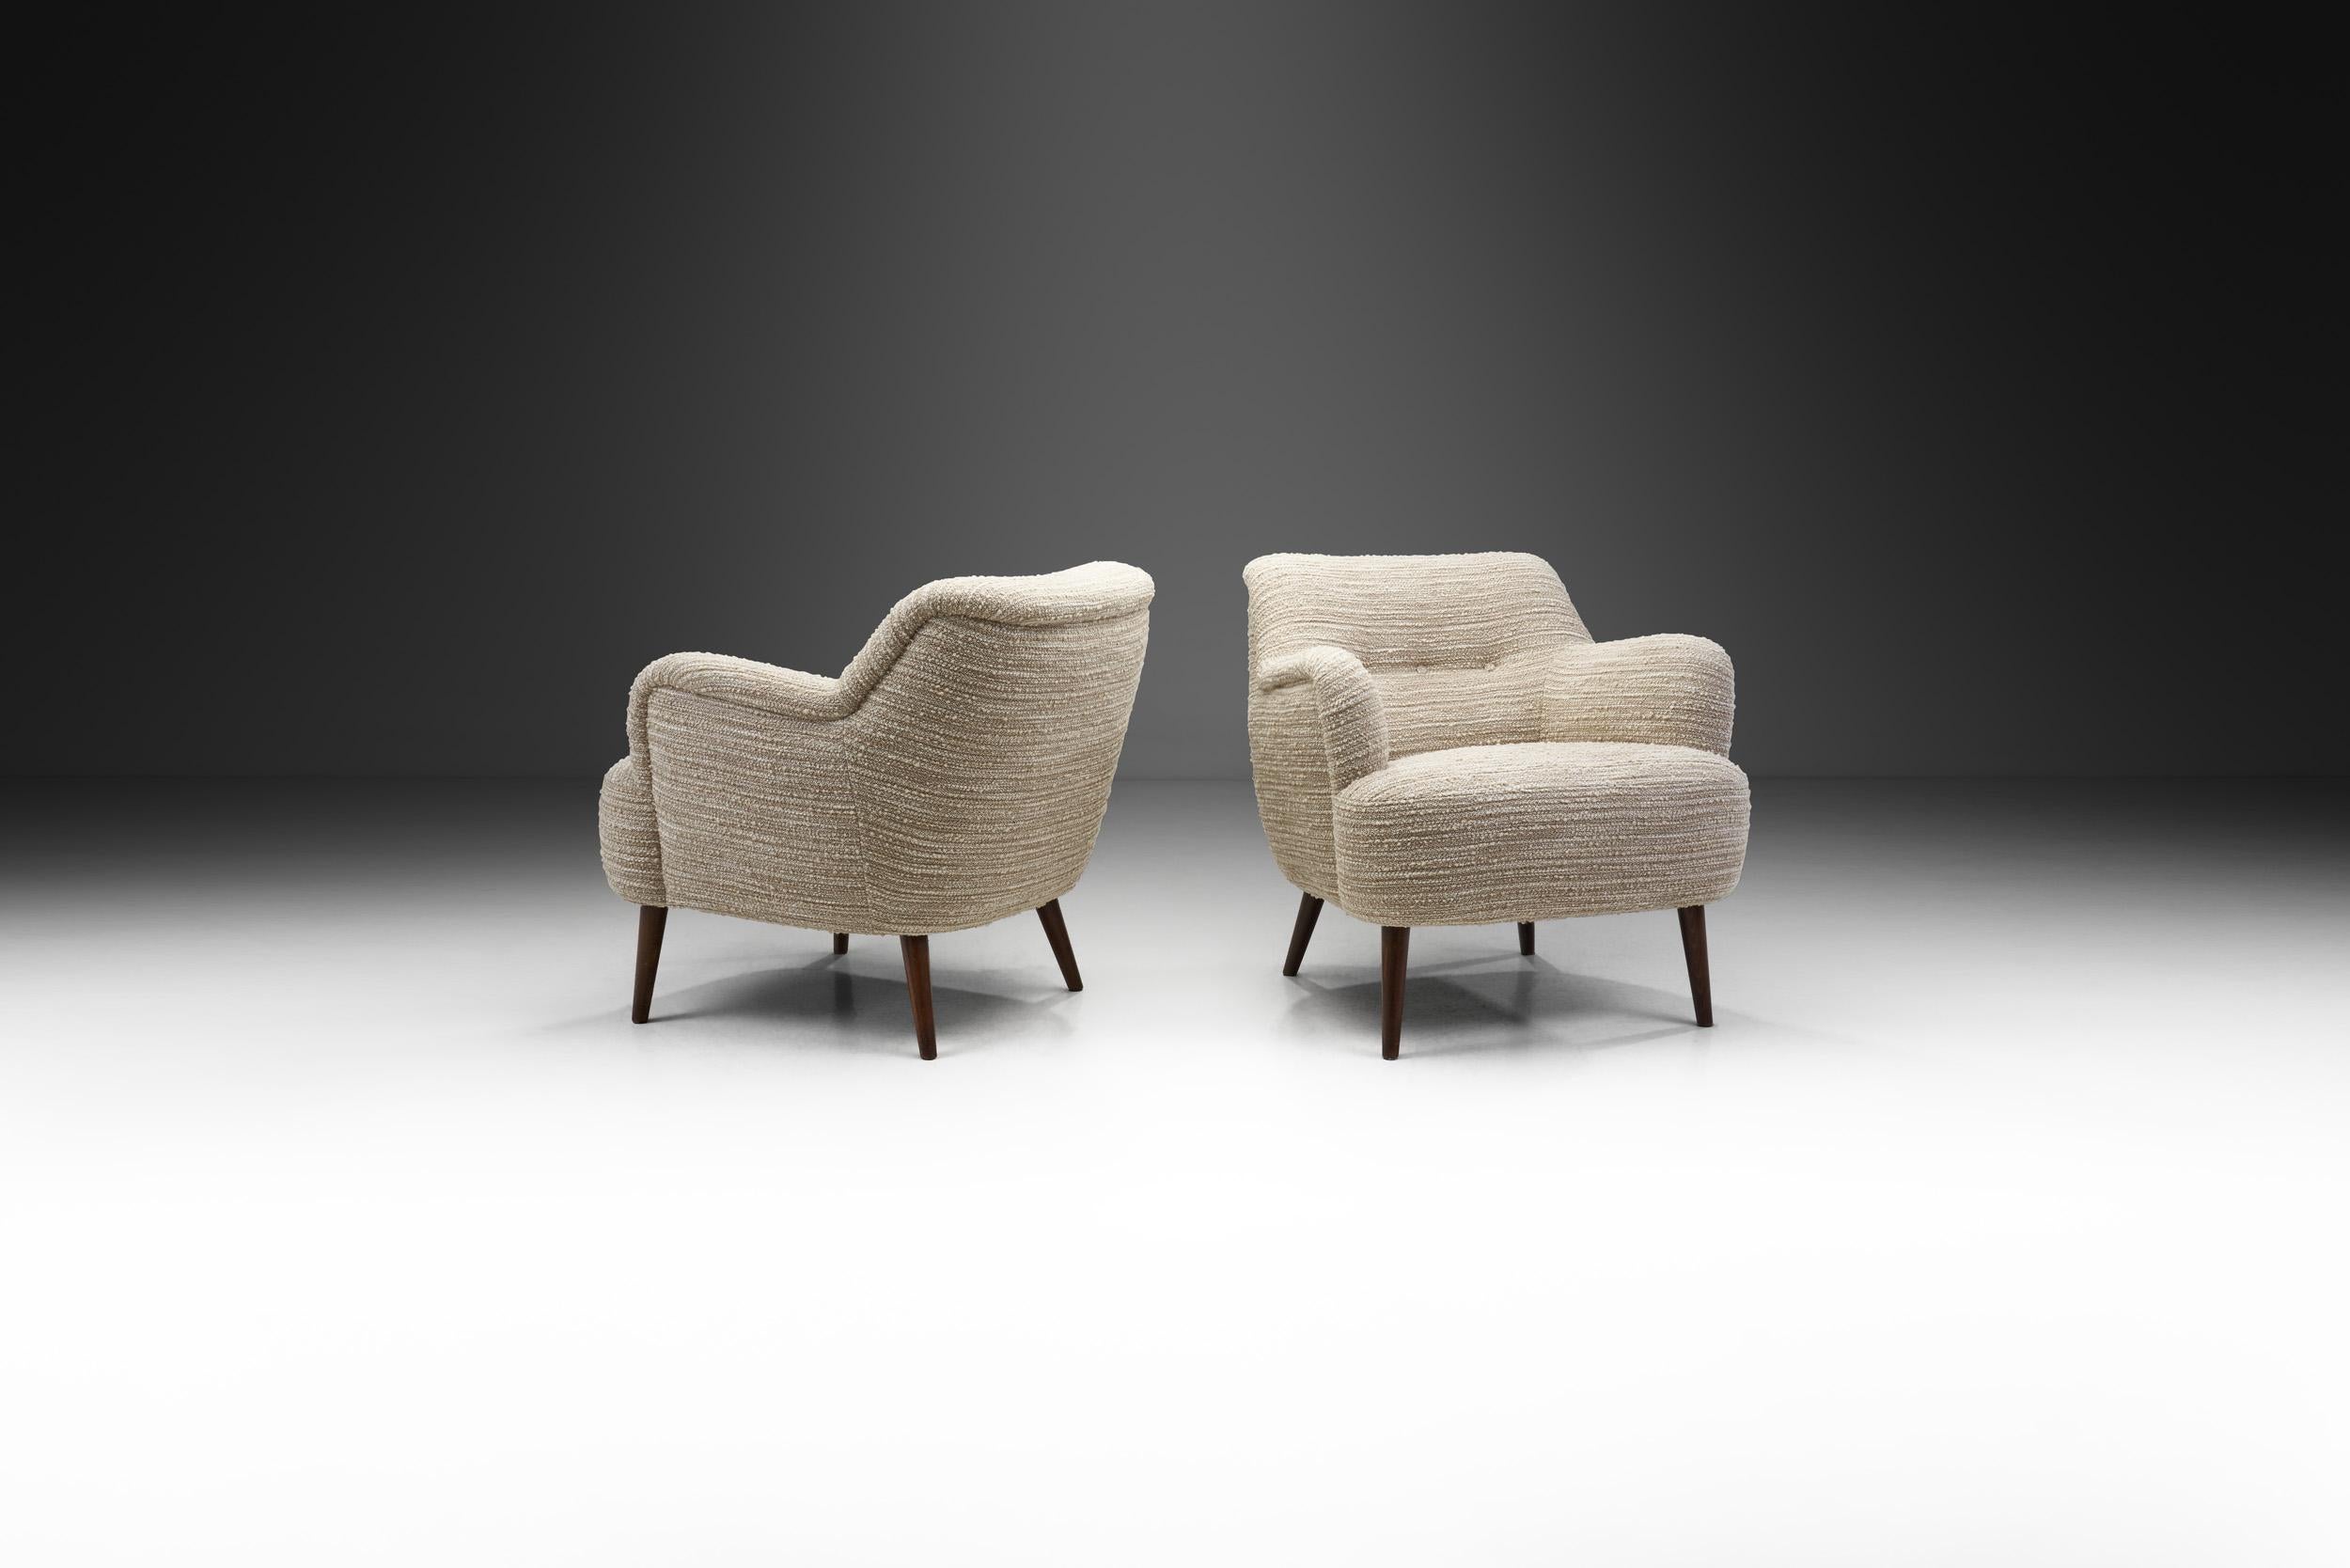 Fabric European Mid-Century Modern Armchairs in Bouclé, Europe, ca 1950s For Sale